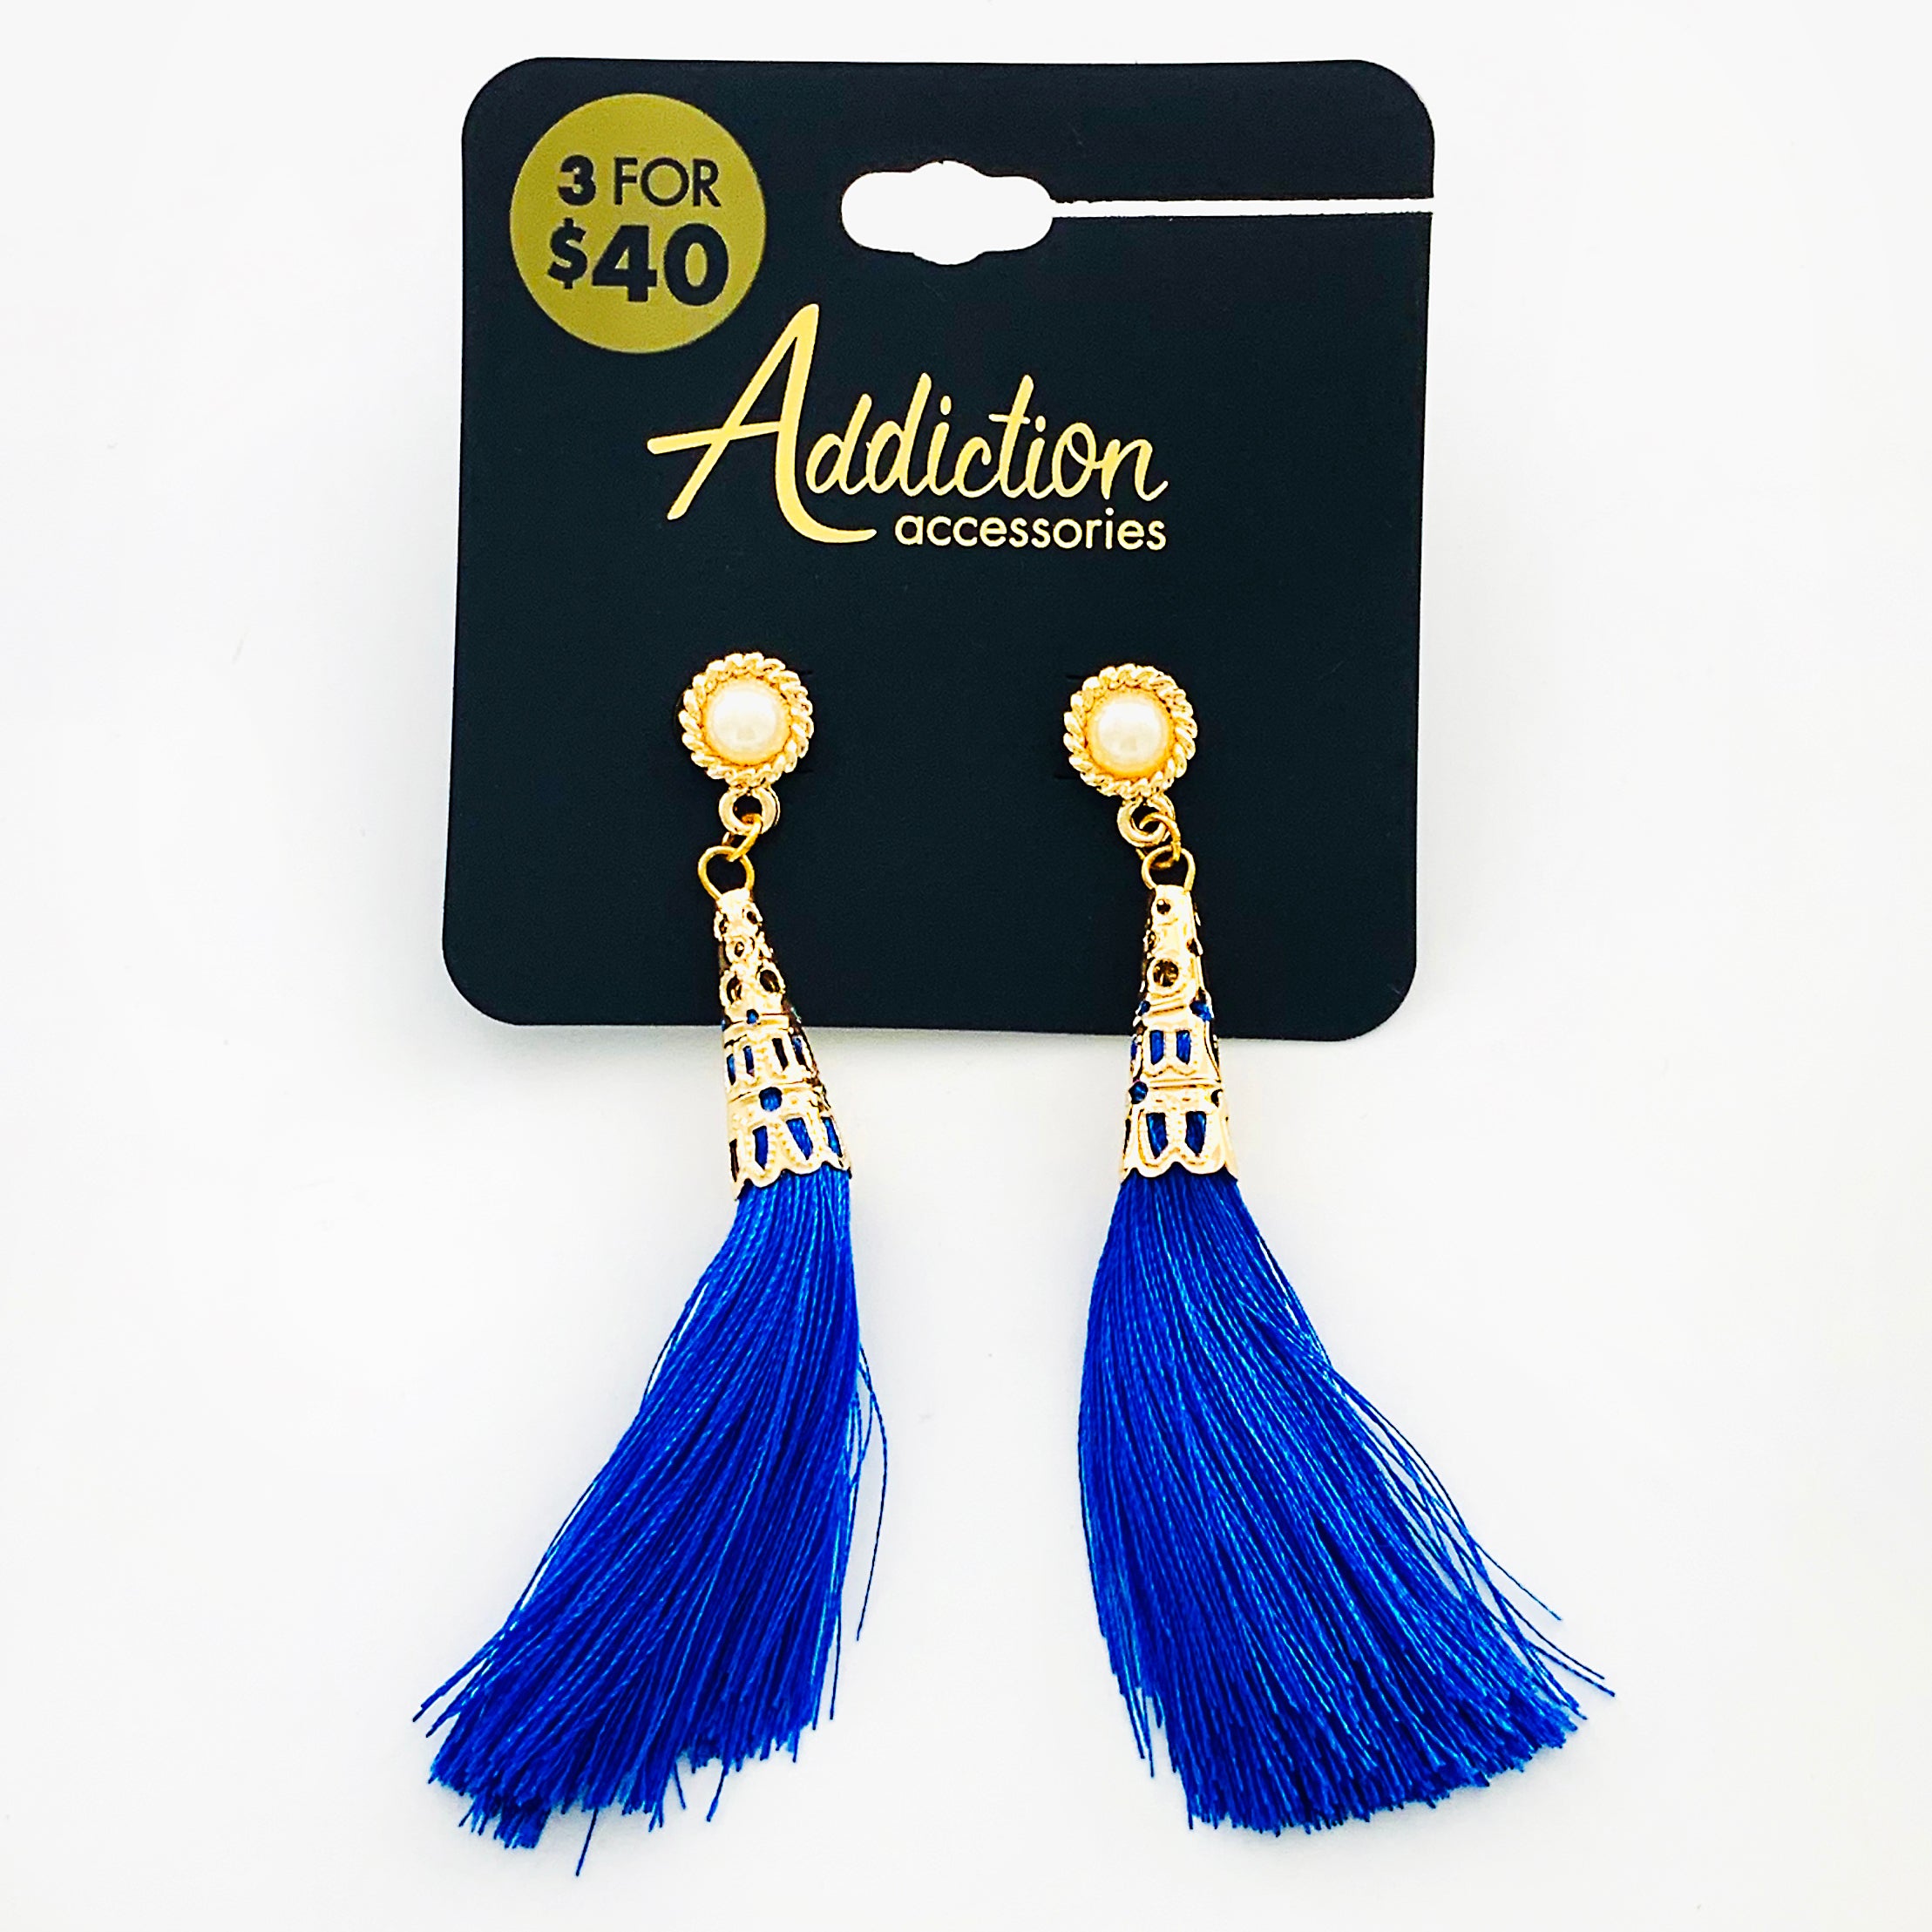 Gold earrings with royal blue tassels